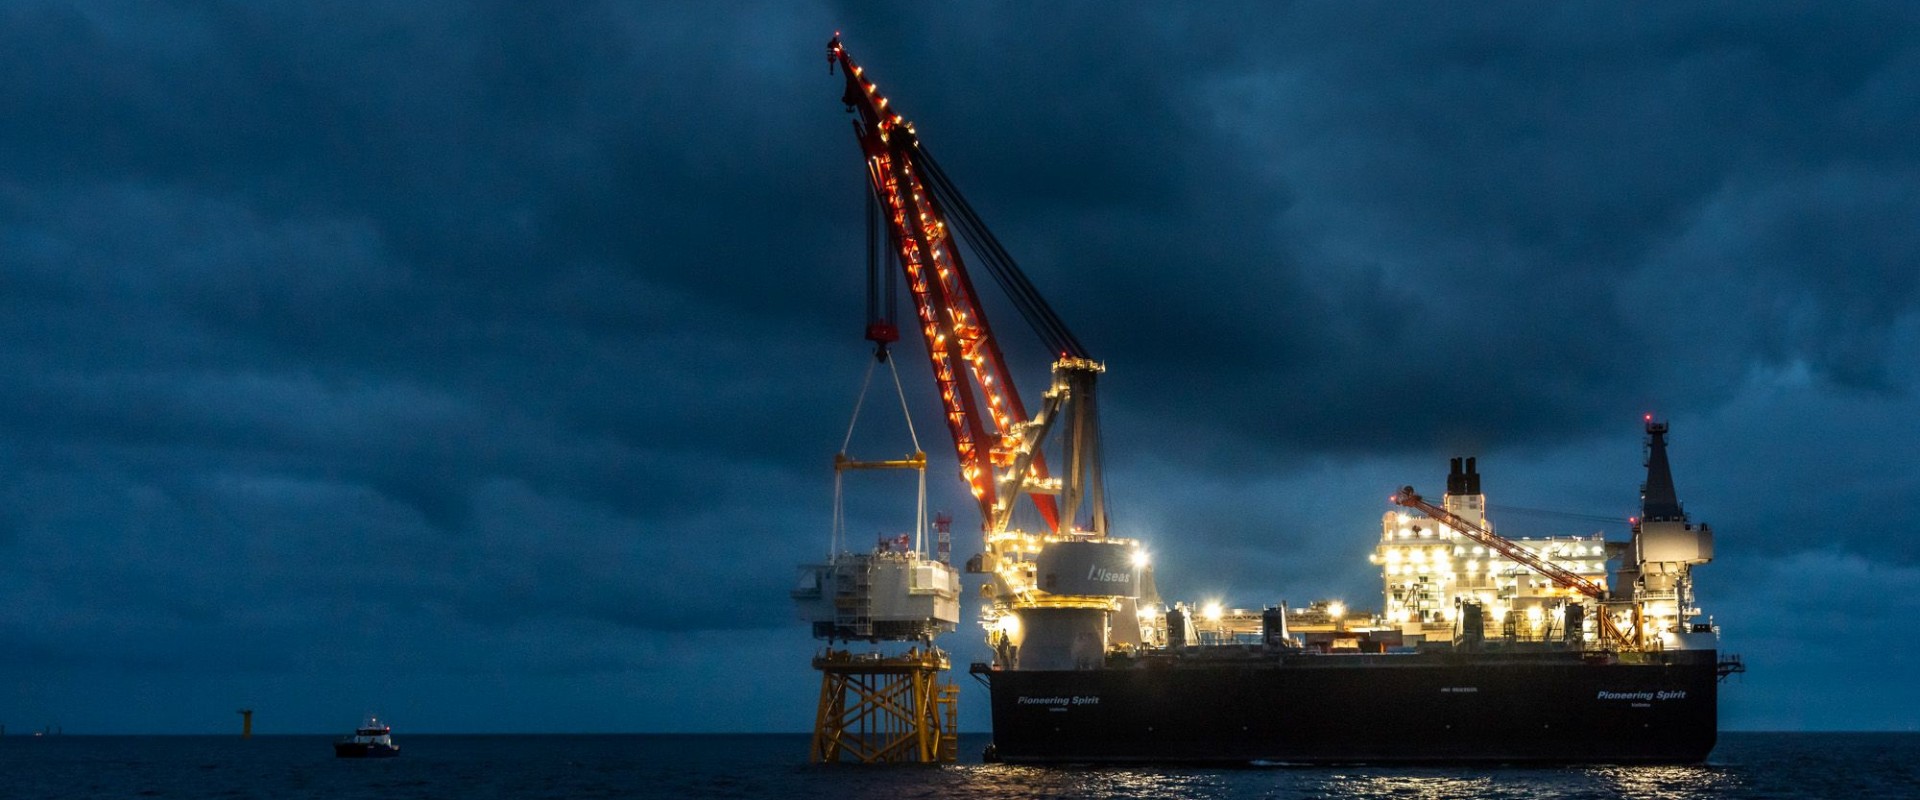 New Stages in the Construction of the Offshore Wind Farm